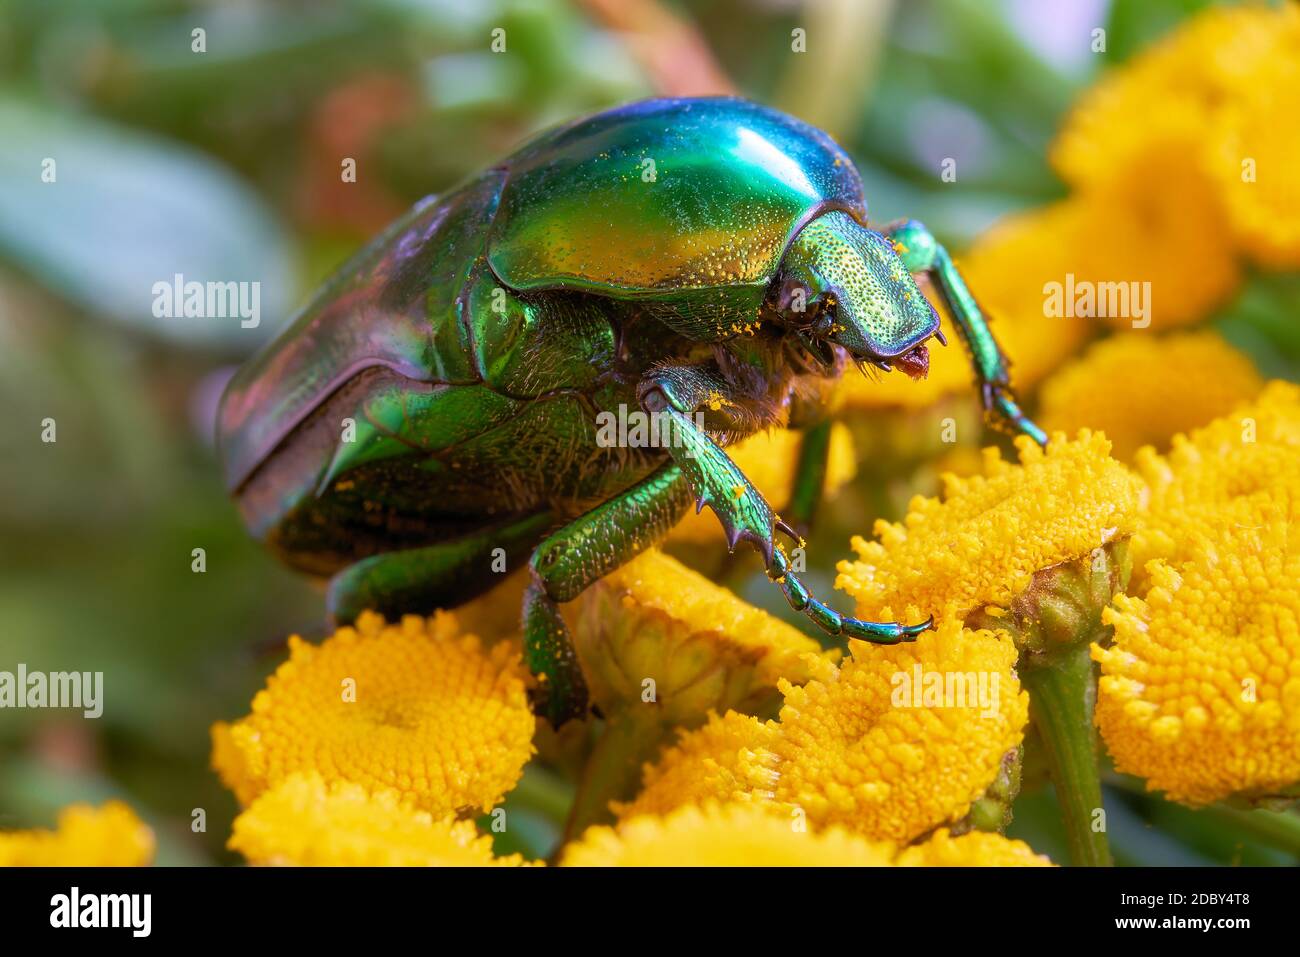 Rose beetle (Cetonia aurata) on a yellow flower in the garden Stock Photo